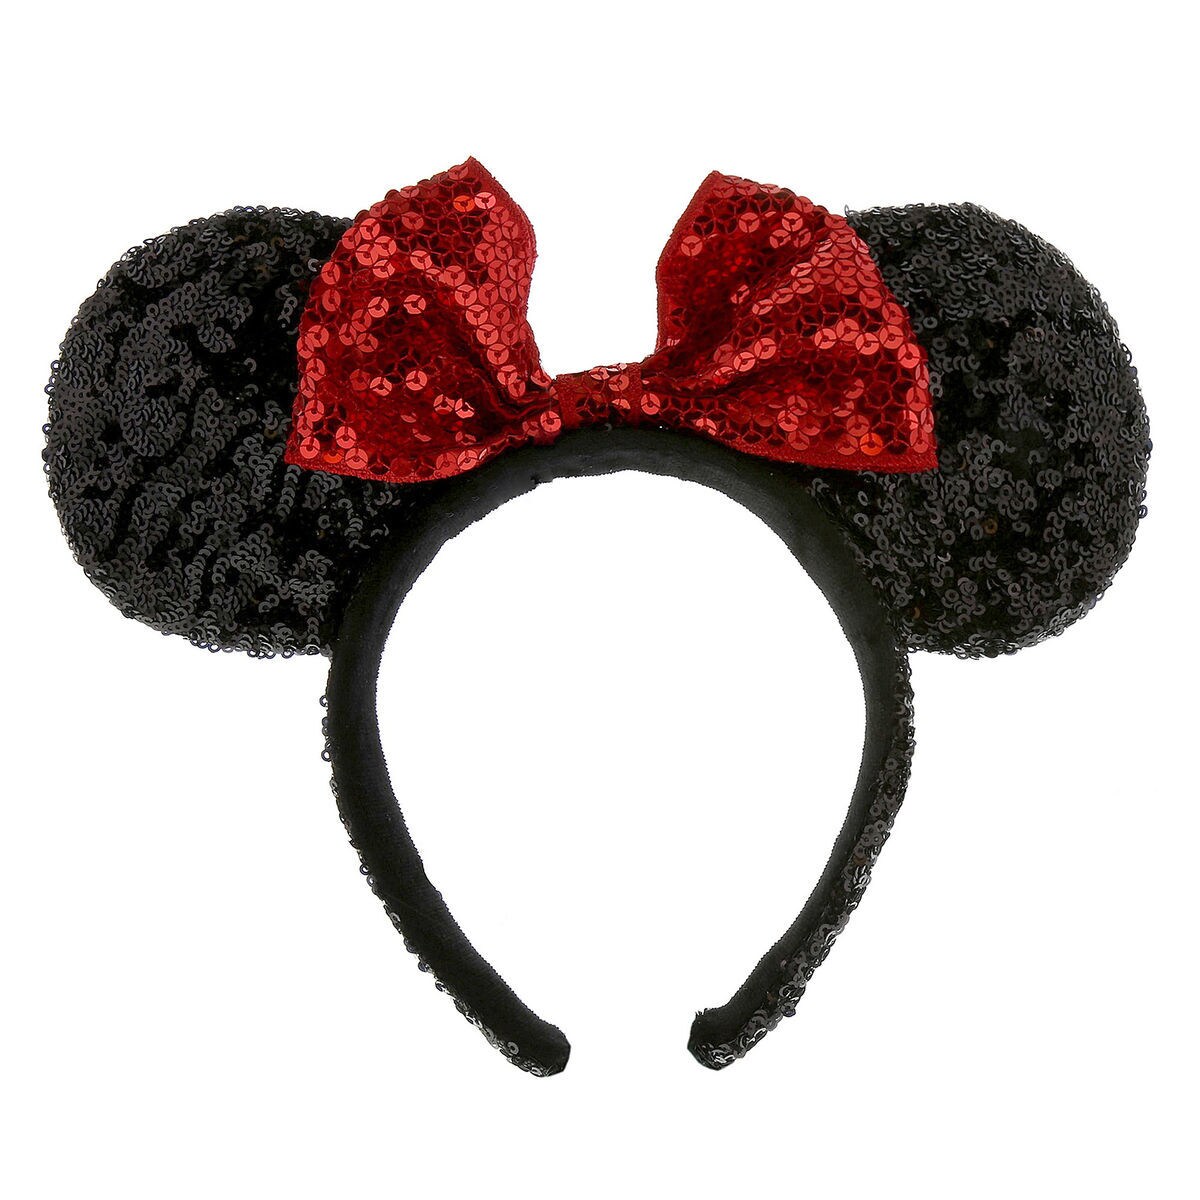 Product Image of Minnie Mouse Ears Headband - Sequined # 1